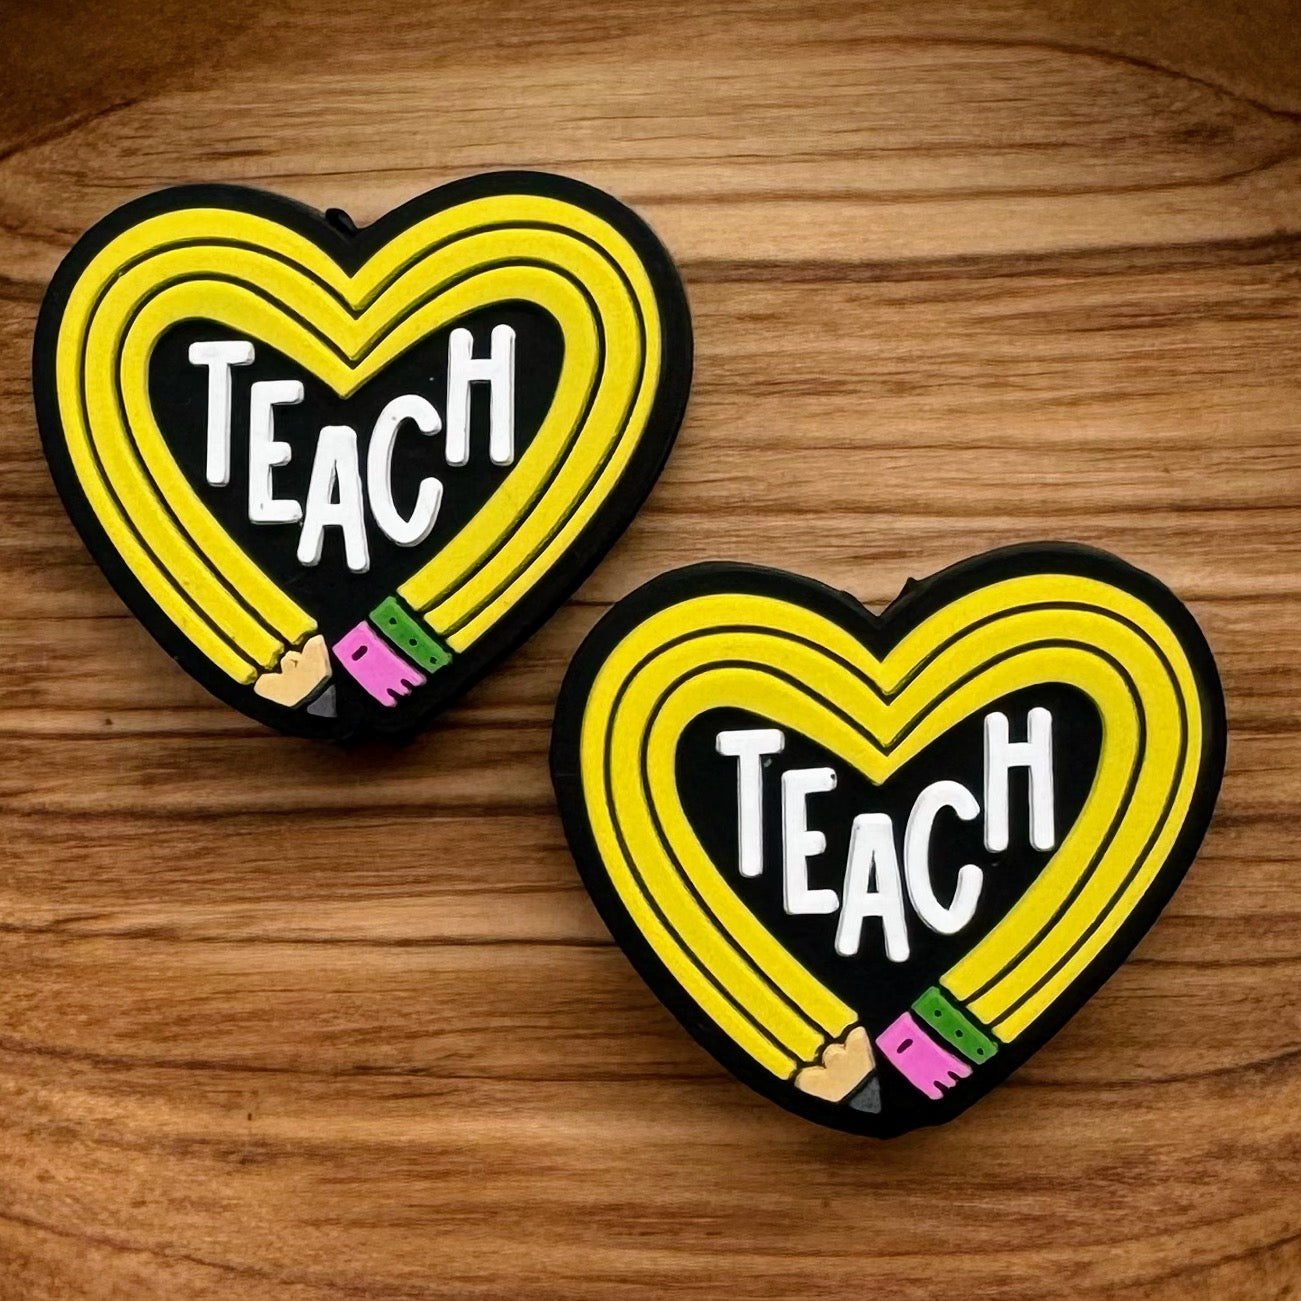 Teach Pencil Heart with White Letters Focal